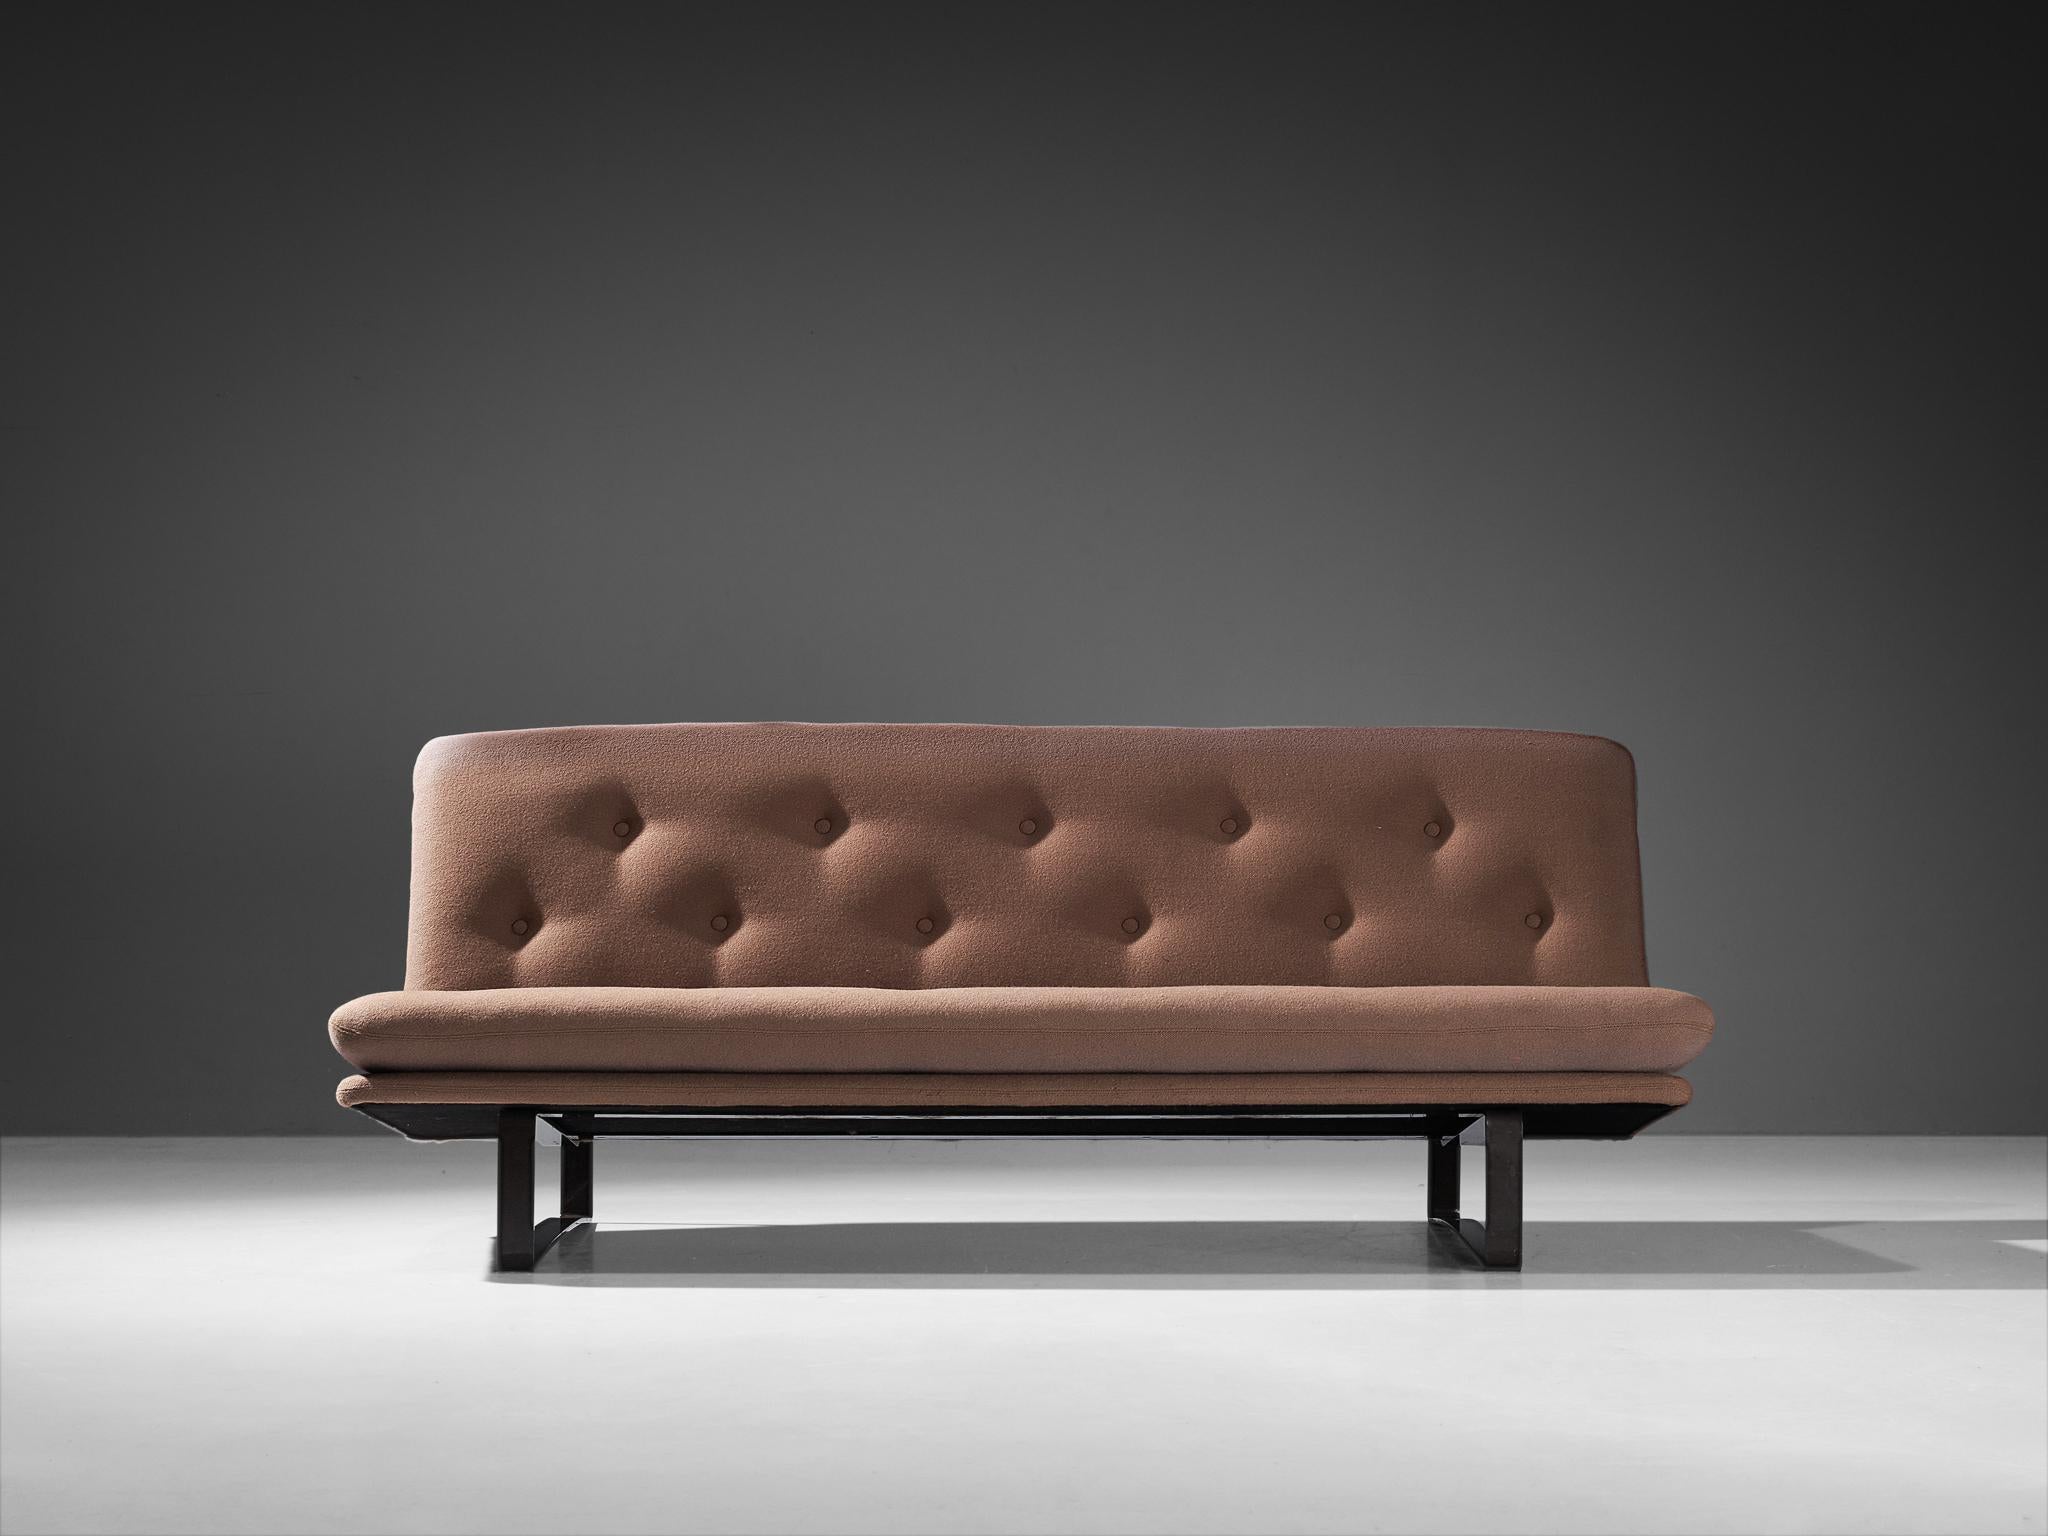 Kho Liang Ie for Artifort, sofa model 'C683', wool, metal, The Netherlands, design 1968

A classic midcentury sofa designed by Indonesian-Dutch designer Kho Liang Ie (1927-1975). A well-made sofa with a modern layout, conceived by using only